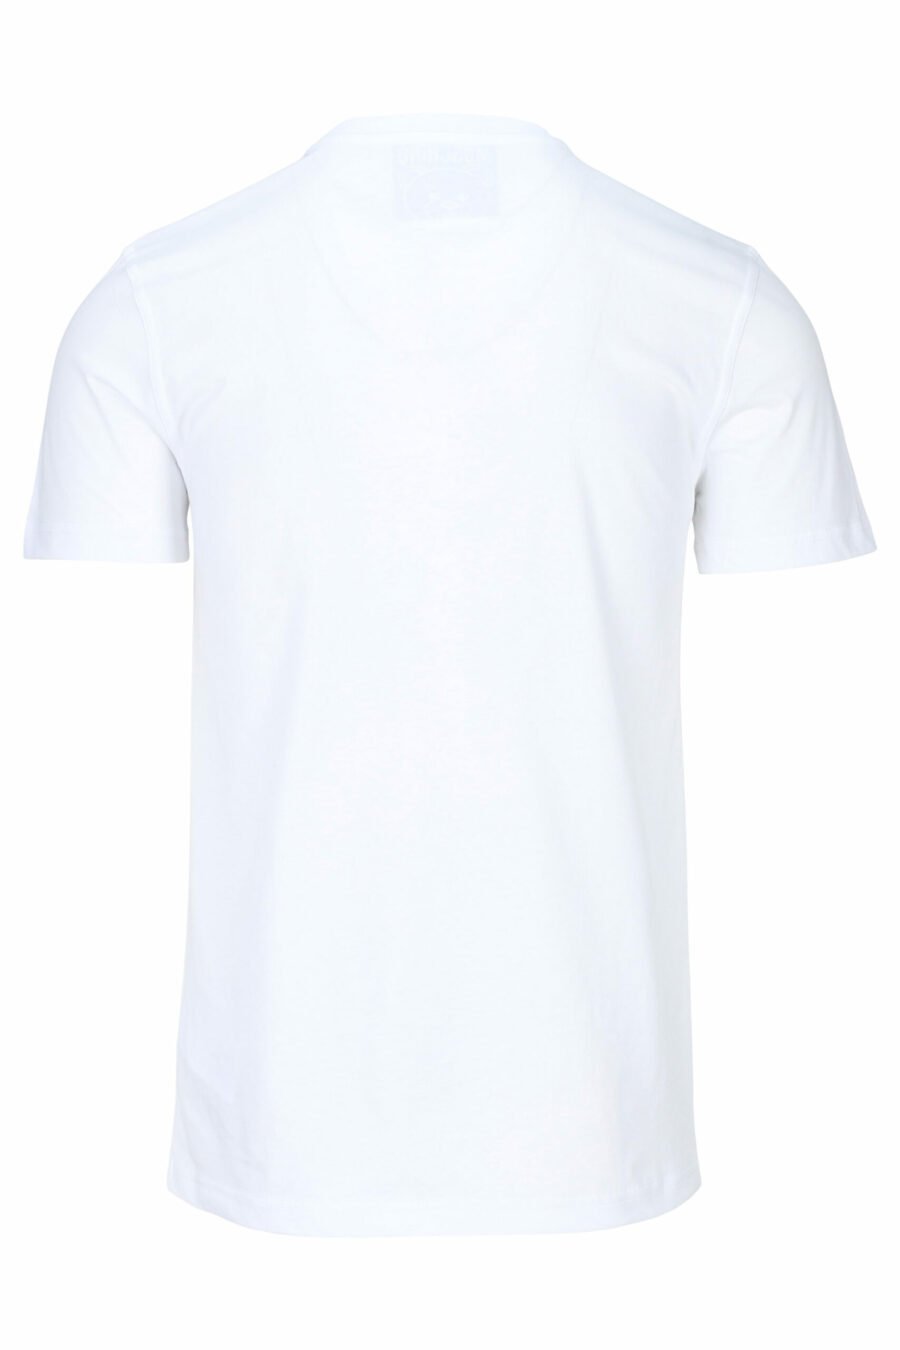 White T-shirt with "teddy" tailor-made maxilogo - 667113108100 1 scaled